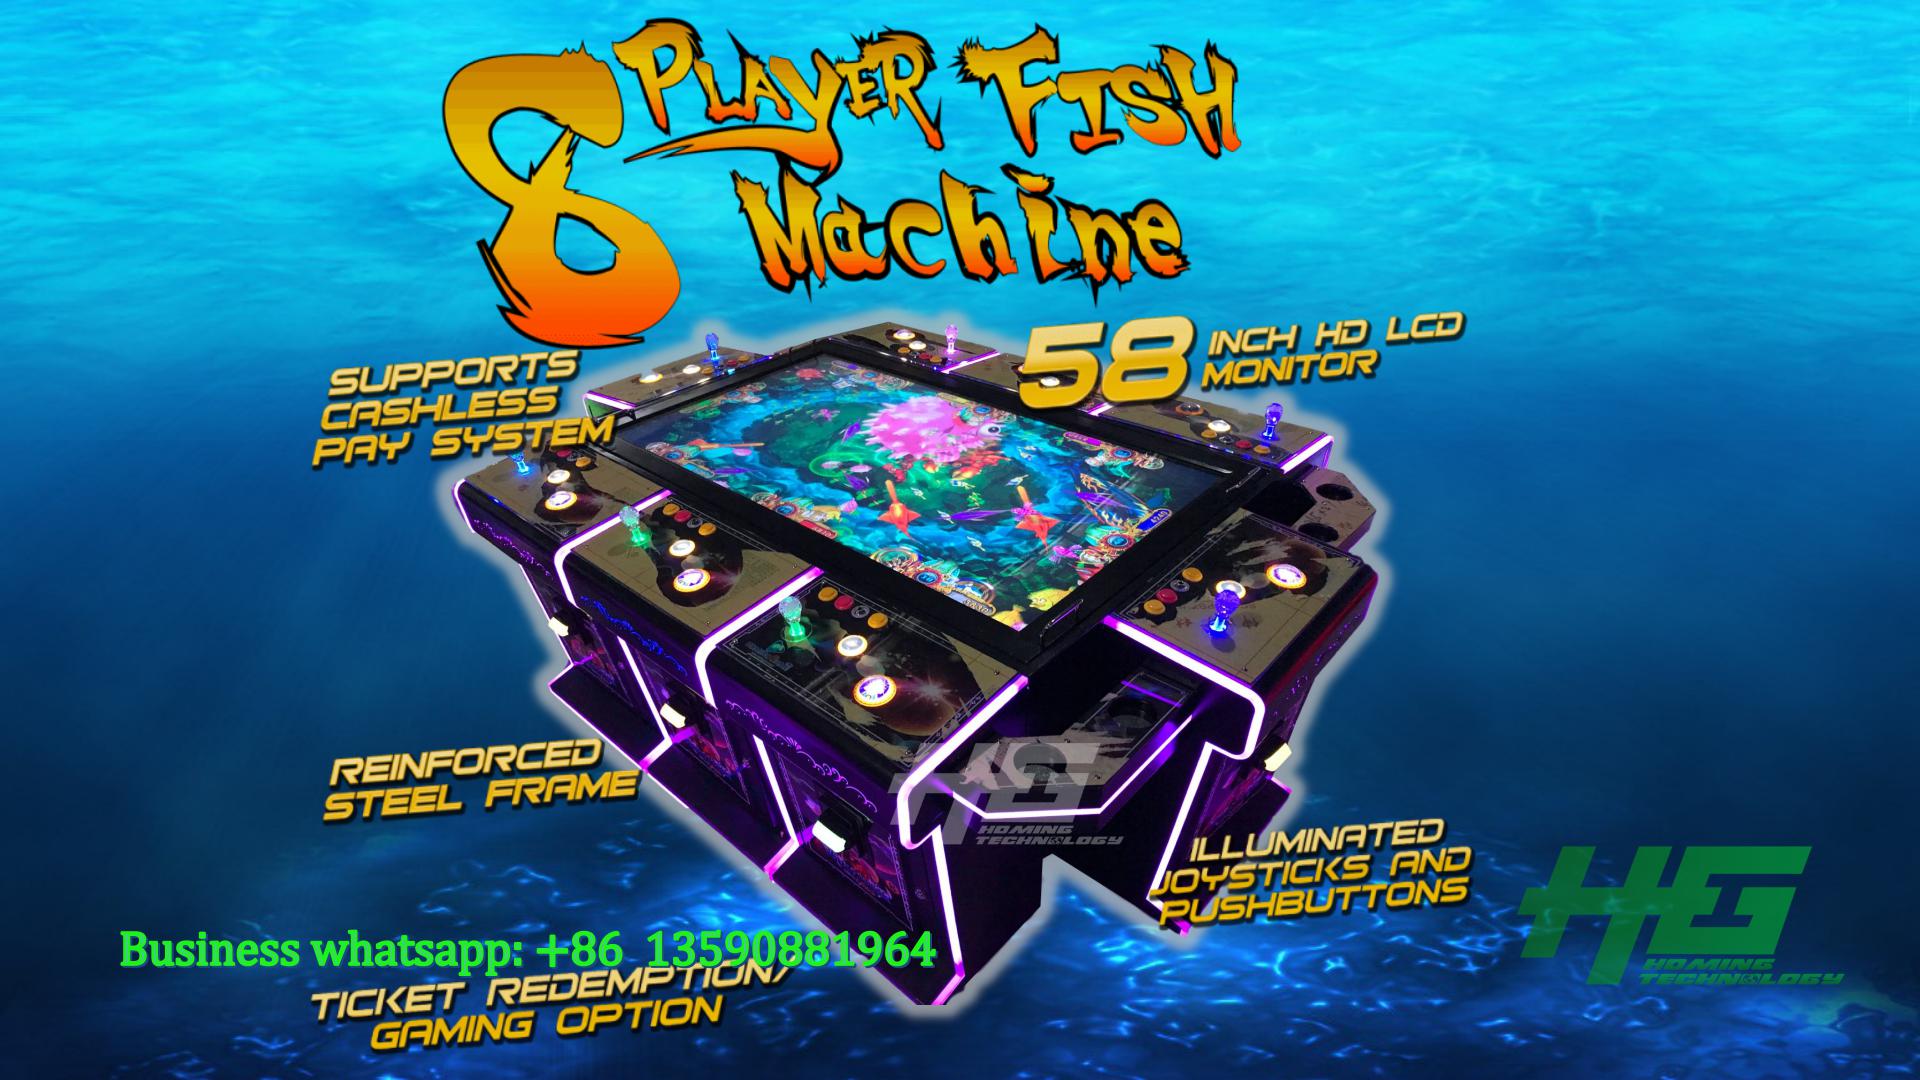 6 players fishing cabinet,6 players fish table,8 players fishing cabinet,8 players fish table,fish cabinets,fishing table,igs,igs fishing game,fish code box,fish code box,install fishing game,install fish cabinets,6 players fire phoenix fishing game,fire phoenix fish table,ocean king 3 plus blackbeard